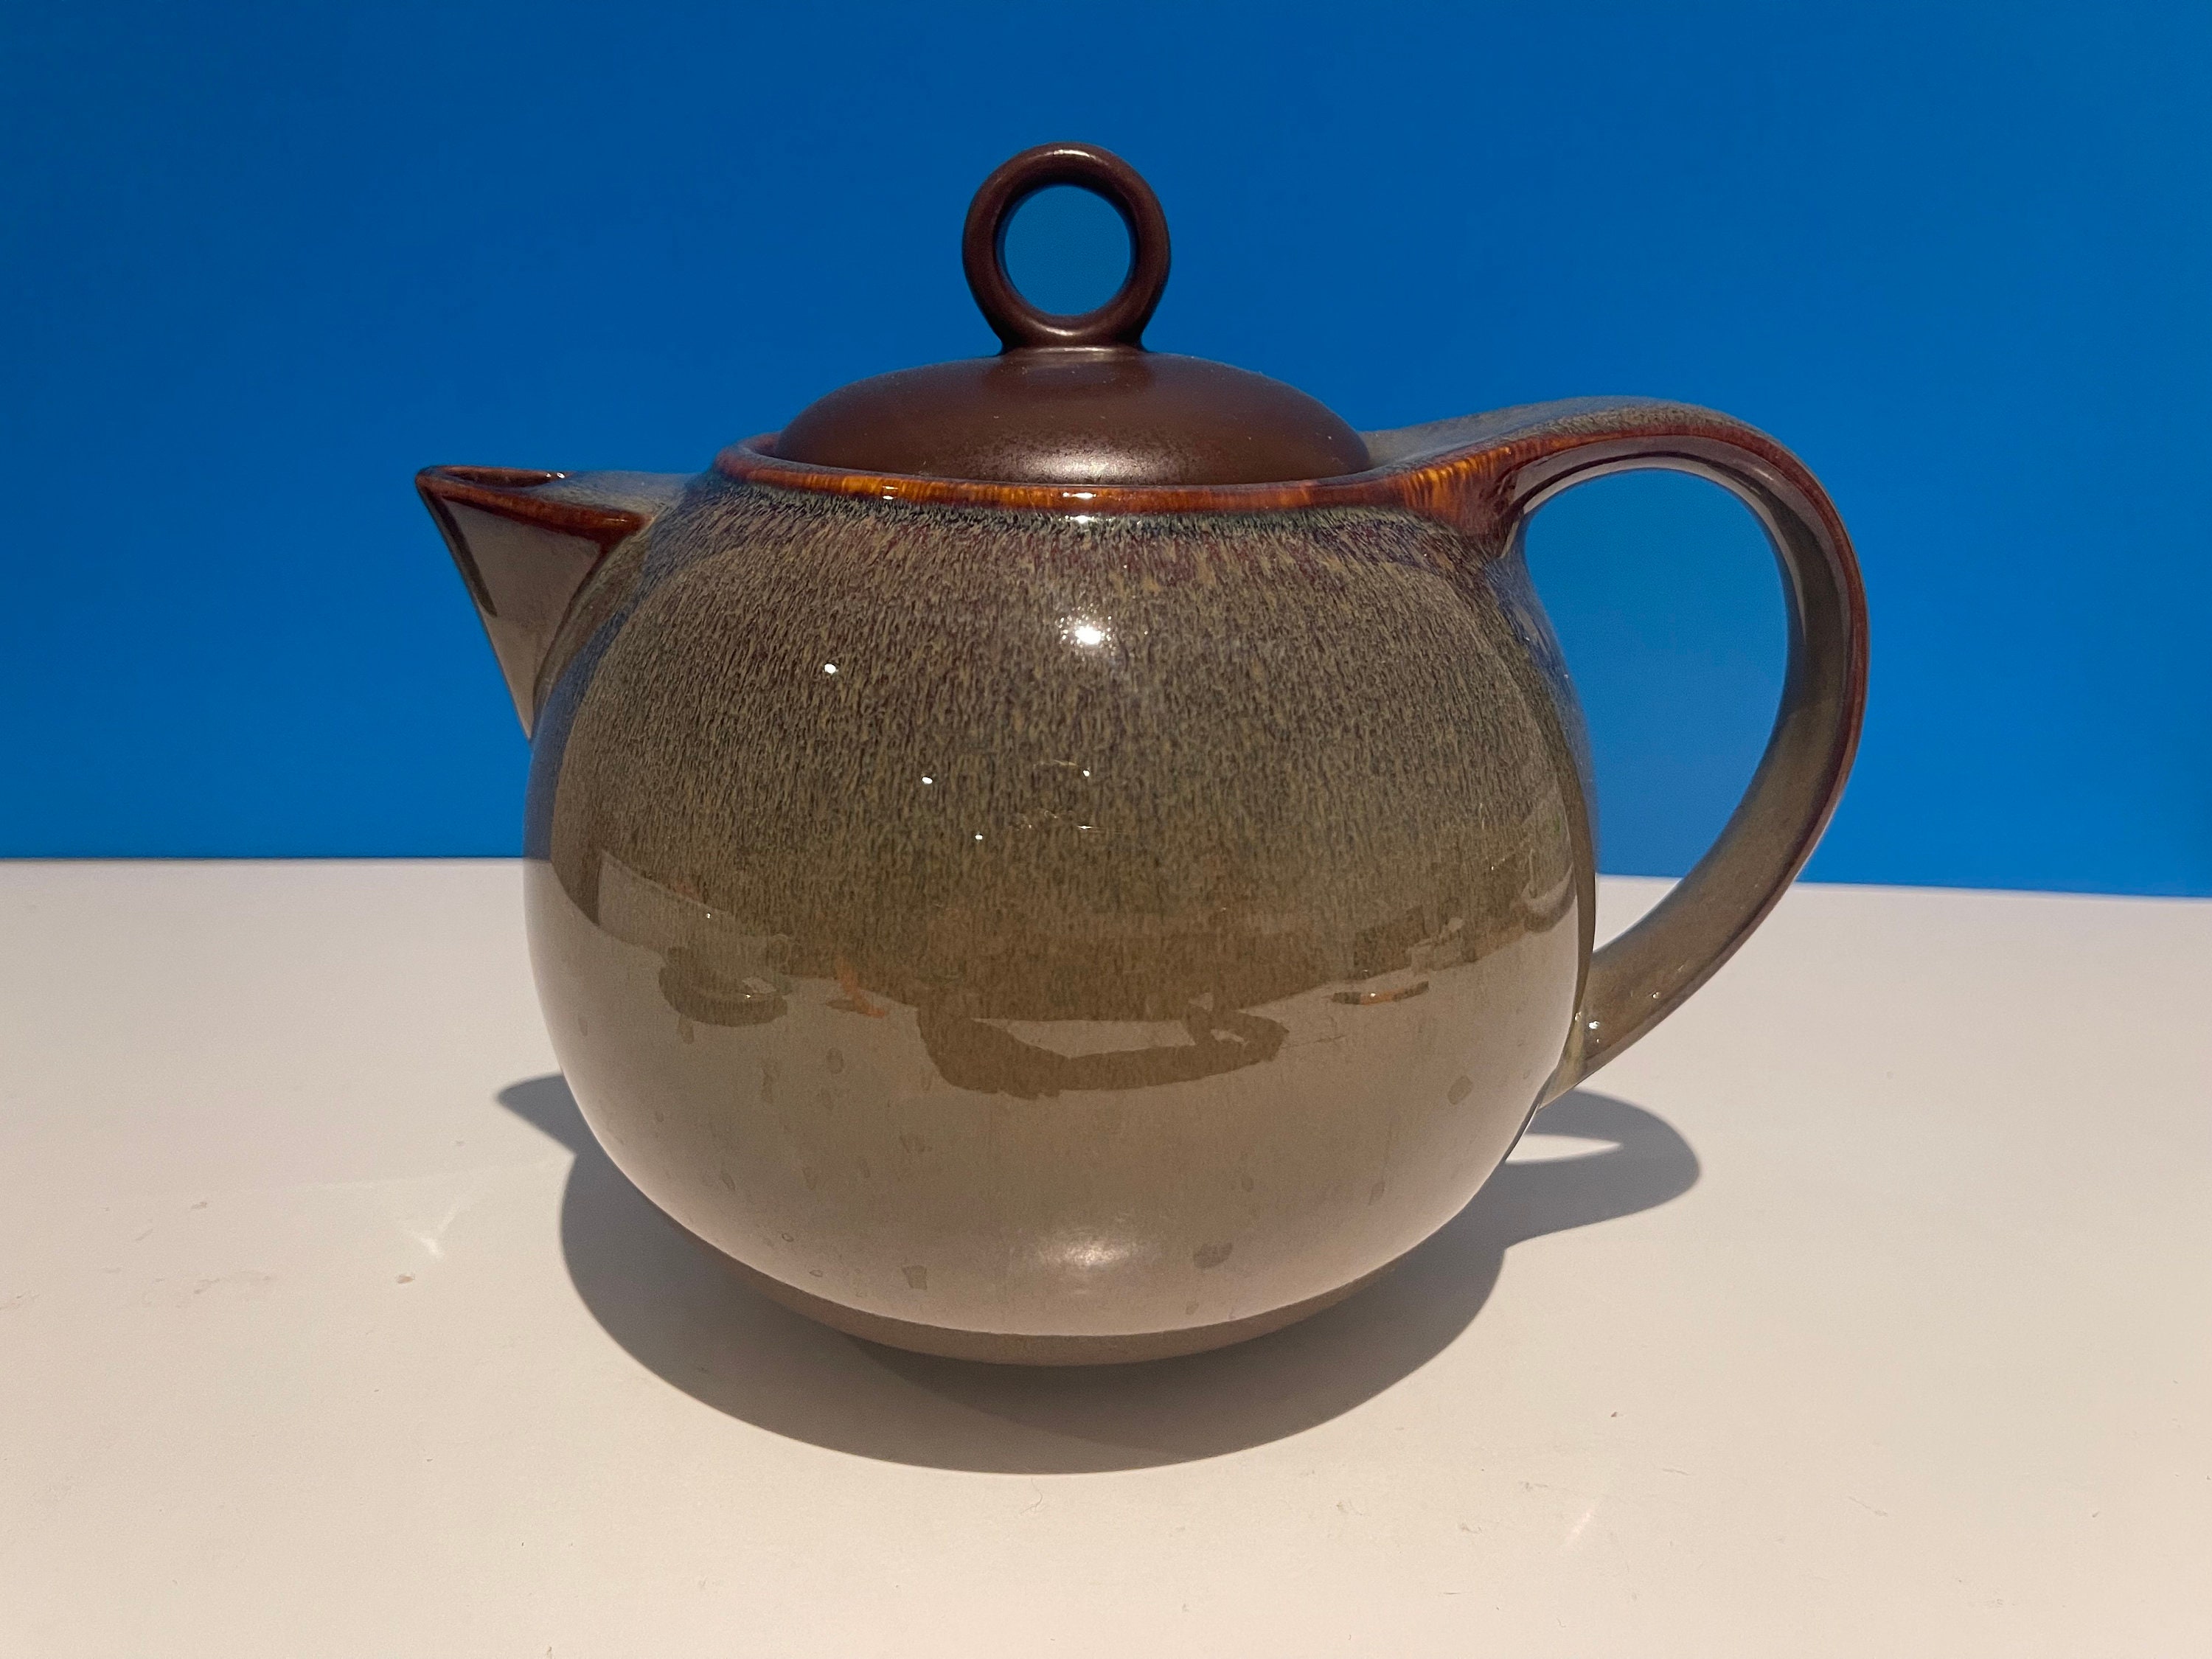 Mariage Frères Art Deco Small Insulated Teapot